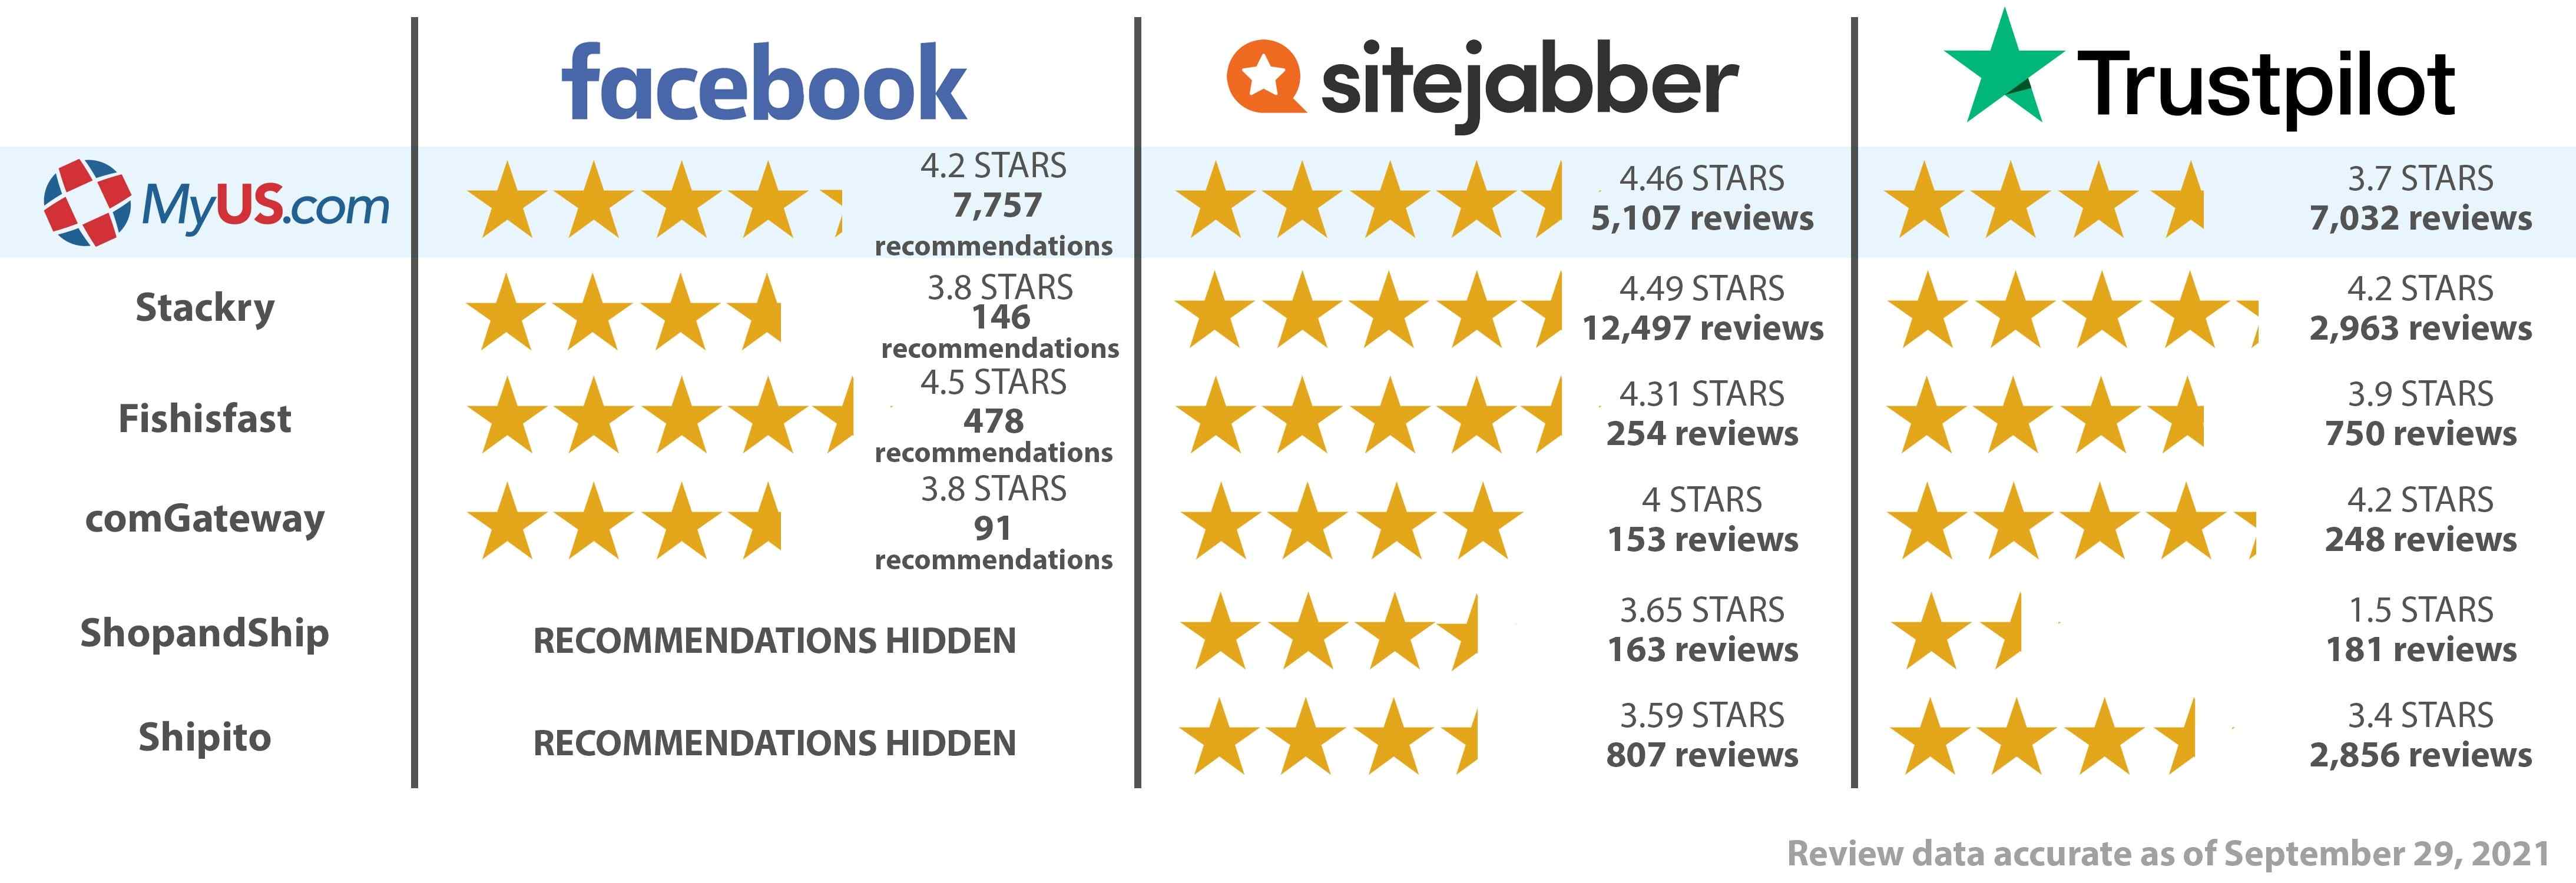 Infographic of MyUS and competitors on review sites like Facebook, sitejabber, and trustpilot